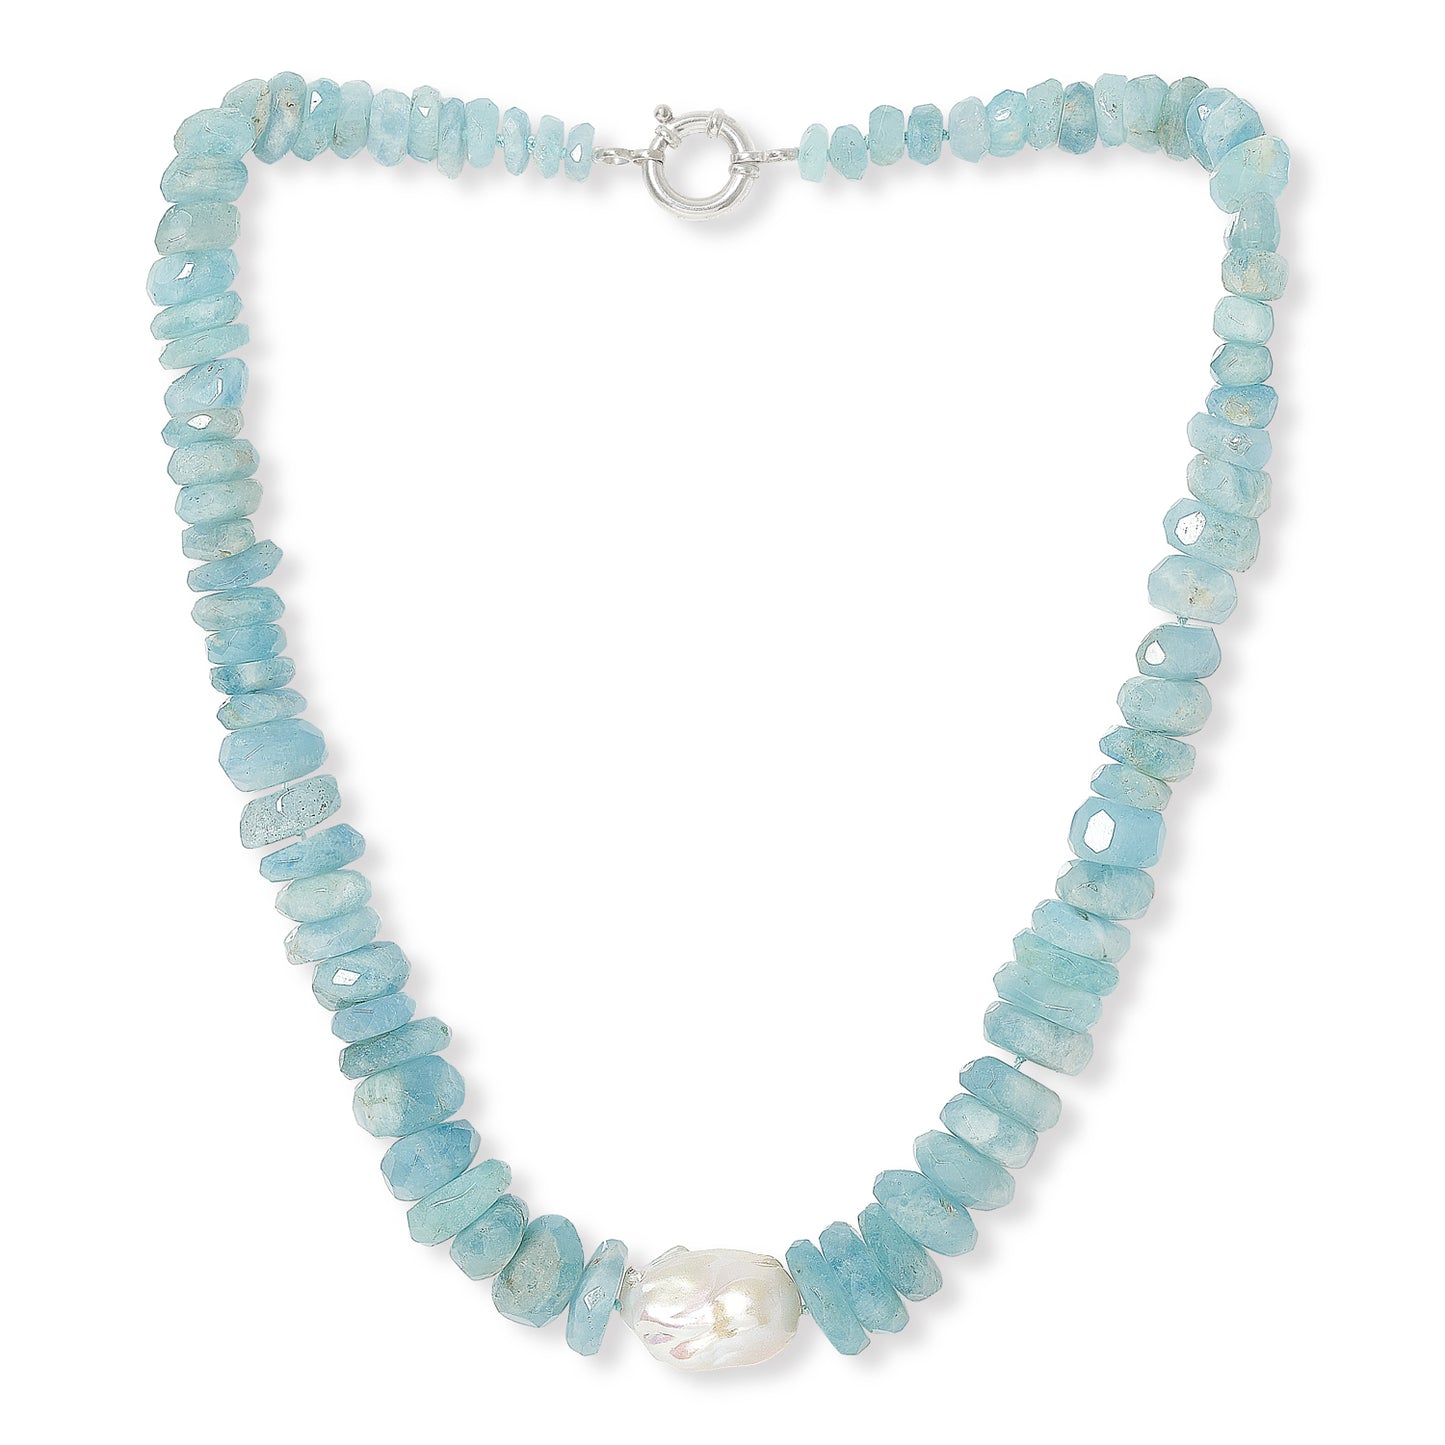 Clara chunky graduated aquamarine necklace with central cultured freshwater pearl